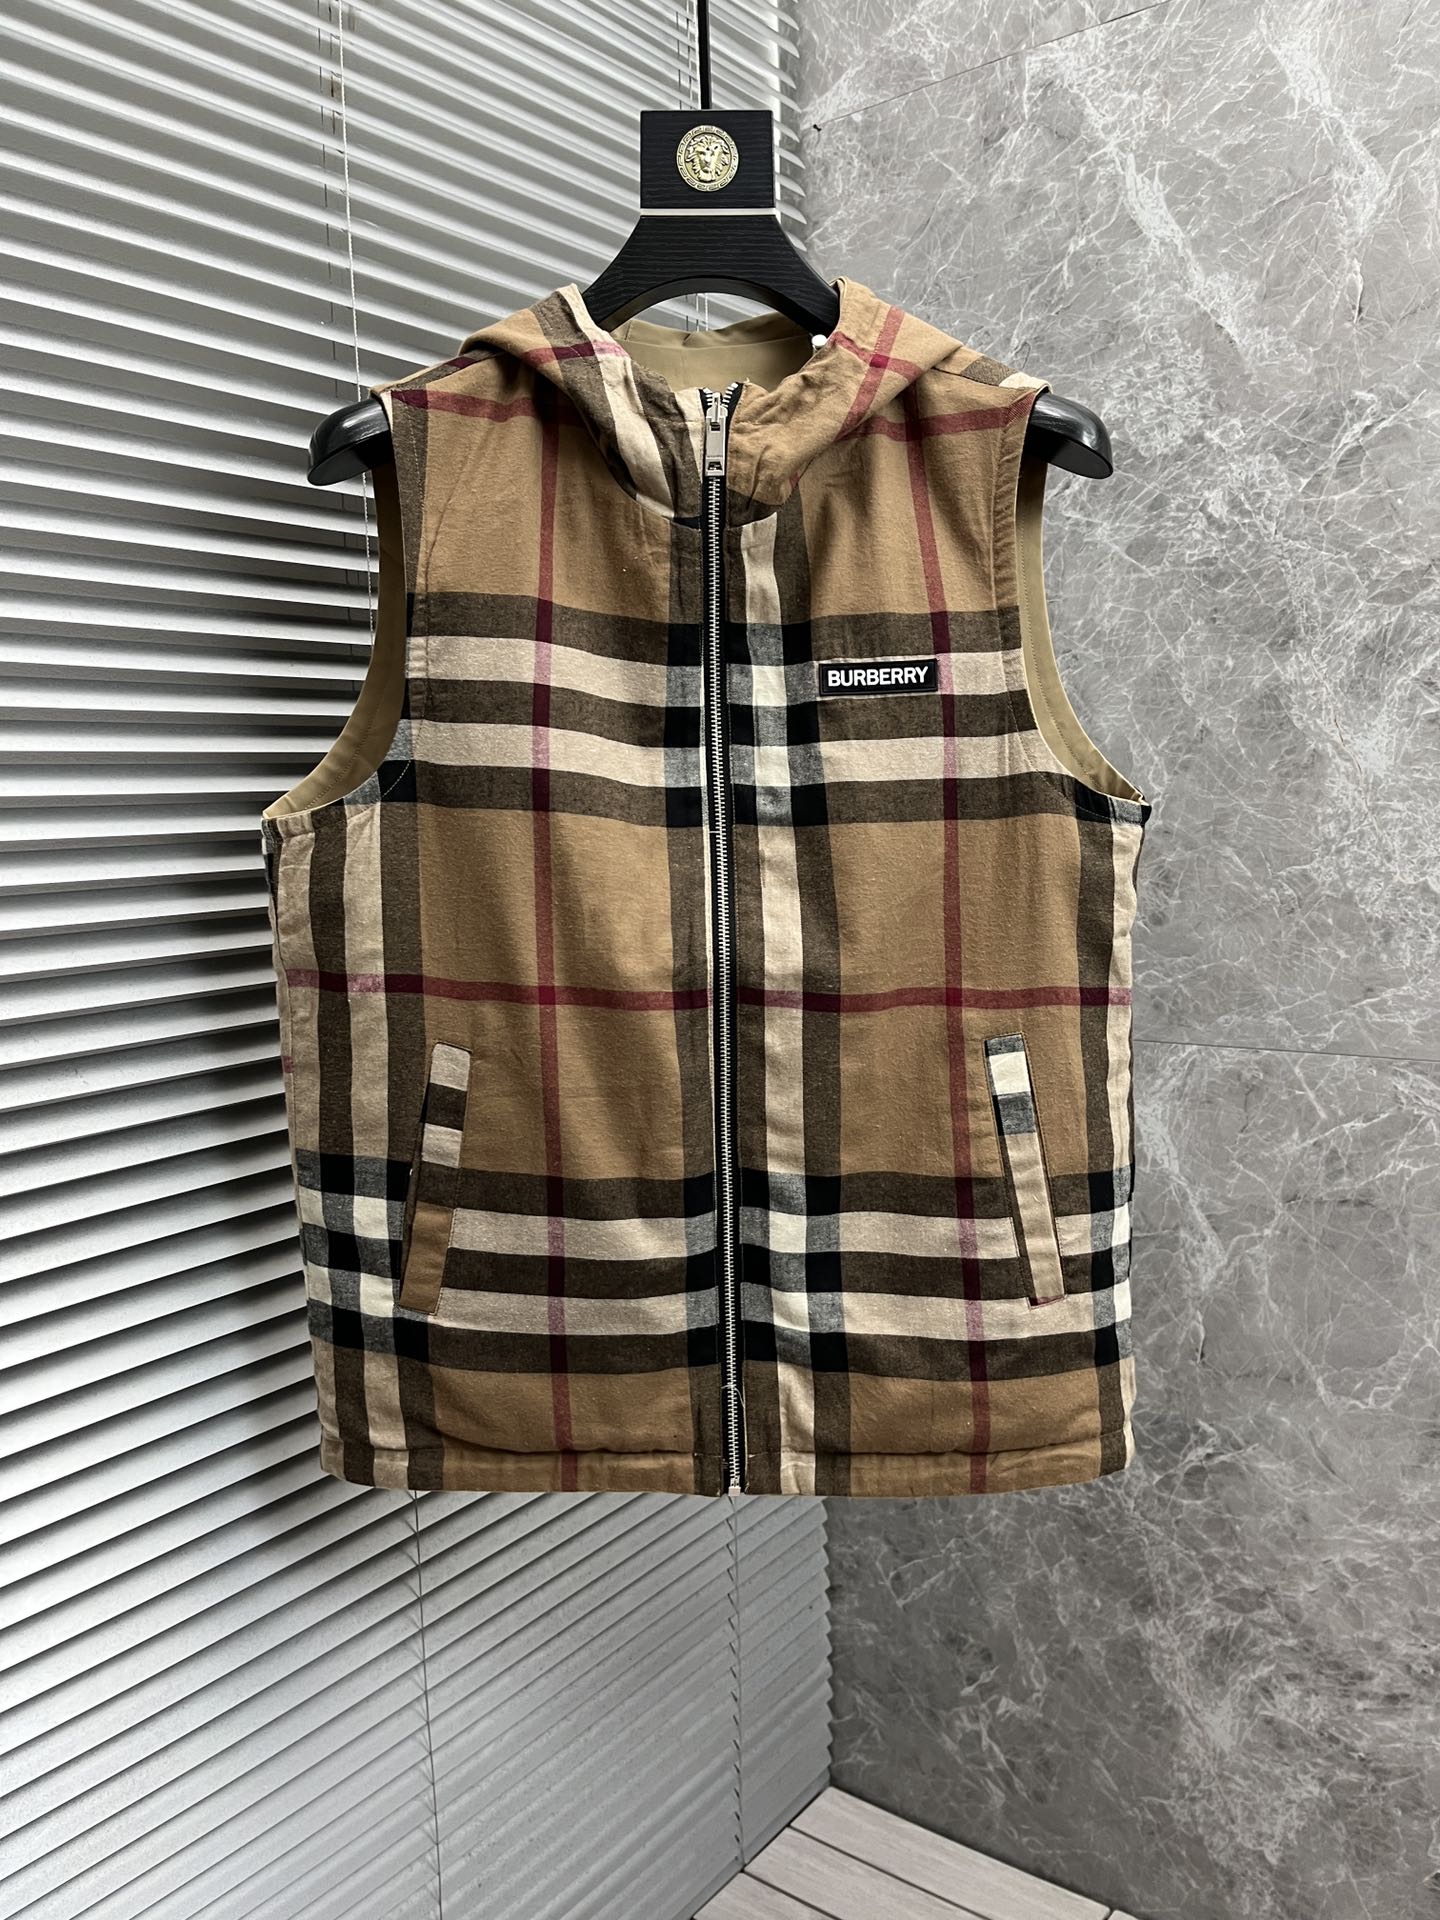 Buy 1:1 Burberry Clothing Coats & Jackets Waistcoat Fake Cheap best online Lattice Fall/Winter Collection Hooded Top